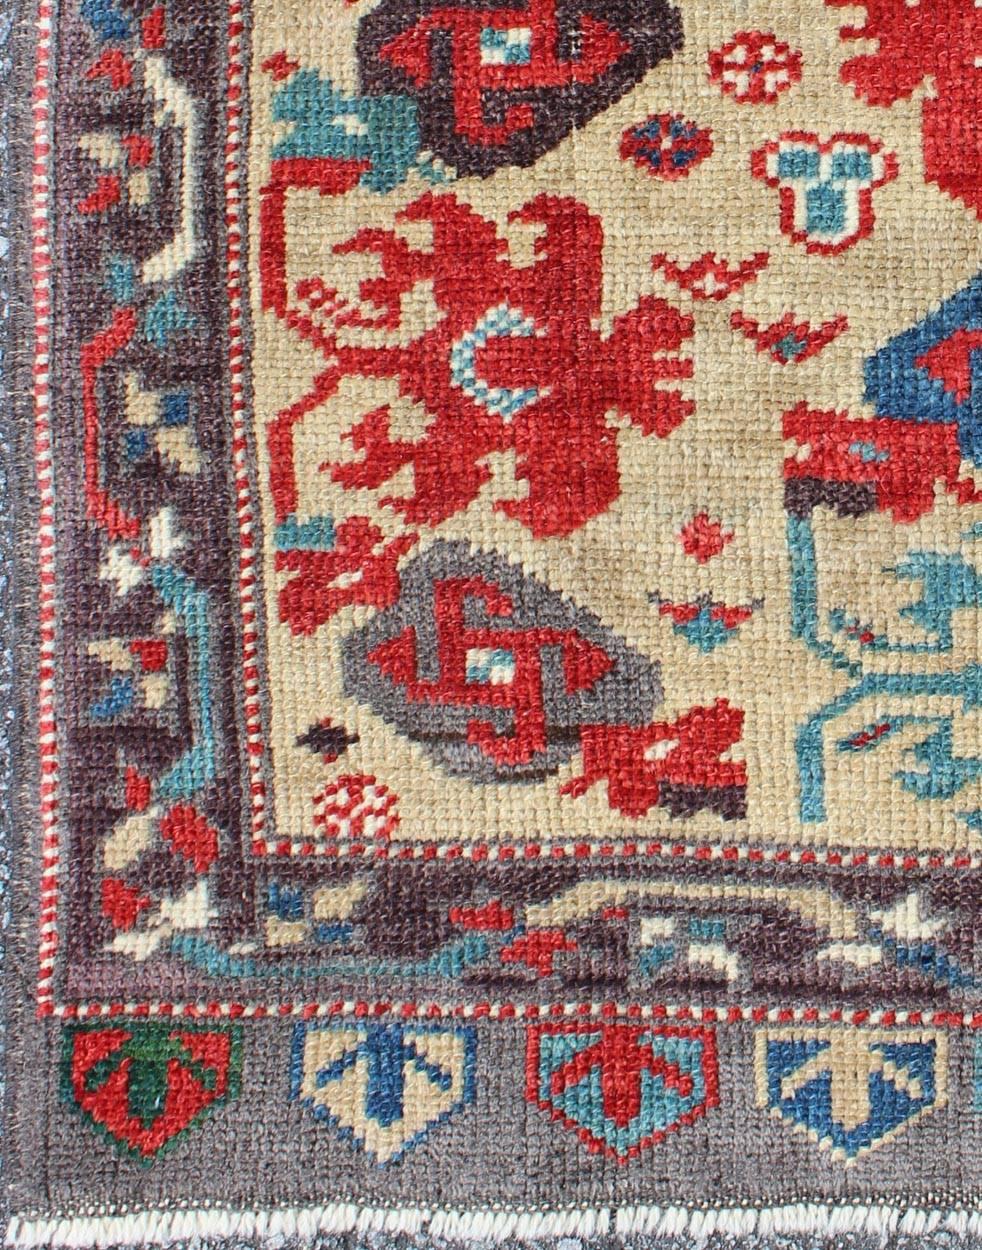 Midcentury vintage Turkish Oushak rug with all-over tribal pattern in cream, rug msd-3, country of origin / type: Turkey / Oushak, circa mid-20th century.

Produced in mid-20th century Turkey, this vintage Oushak is characterized by a comely and